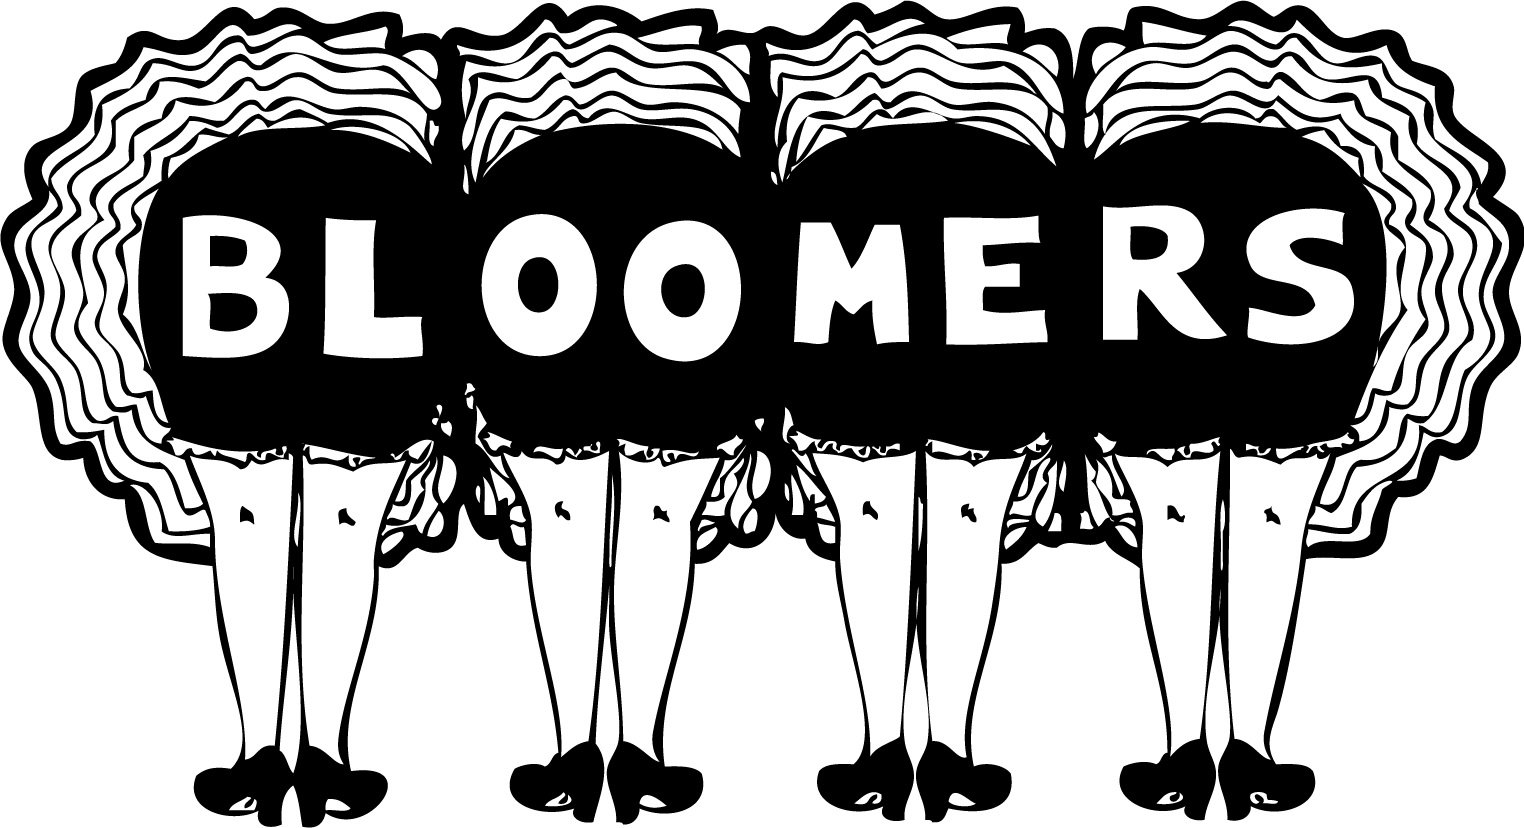 Bloomers Comedy